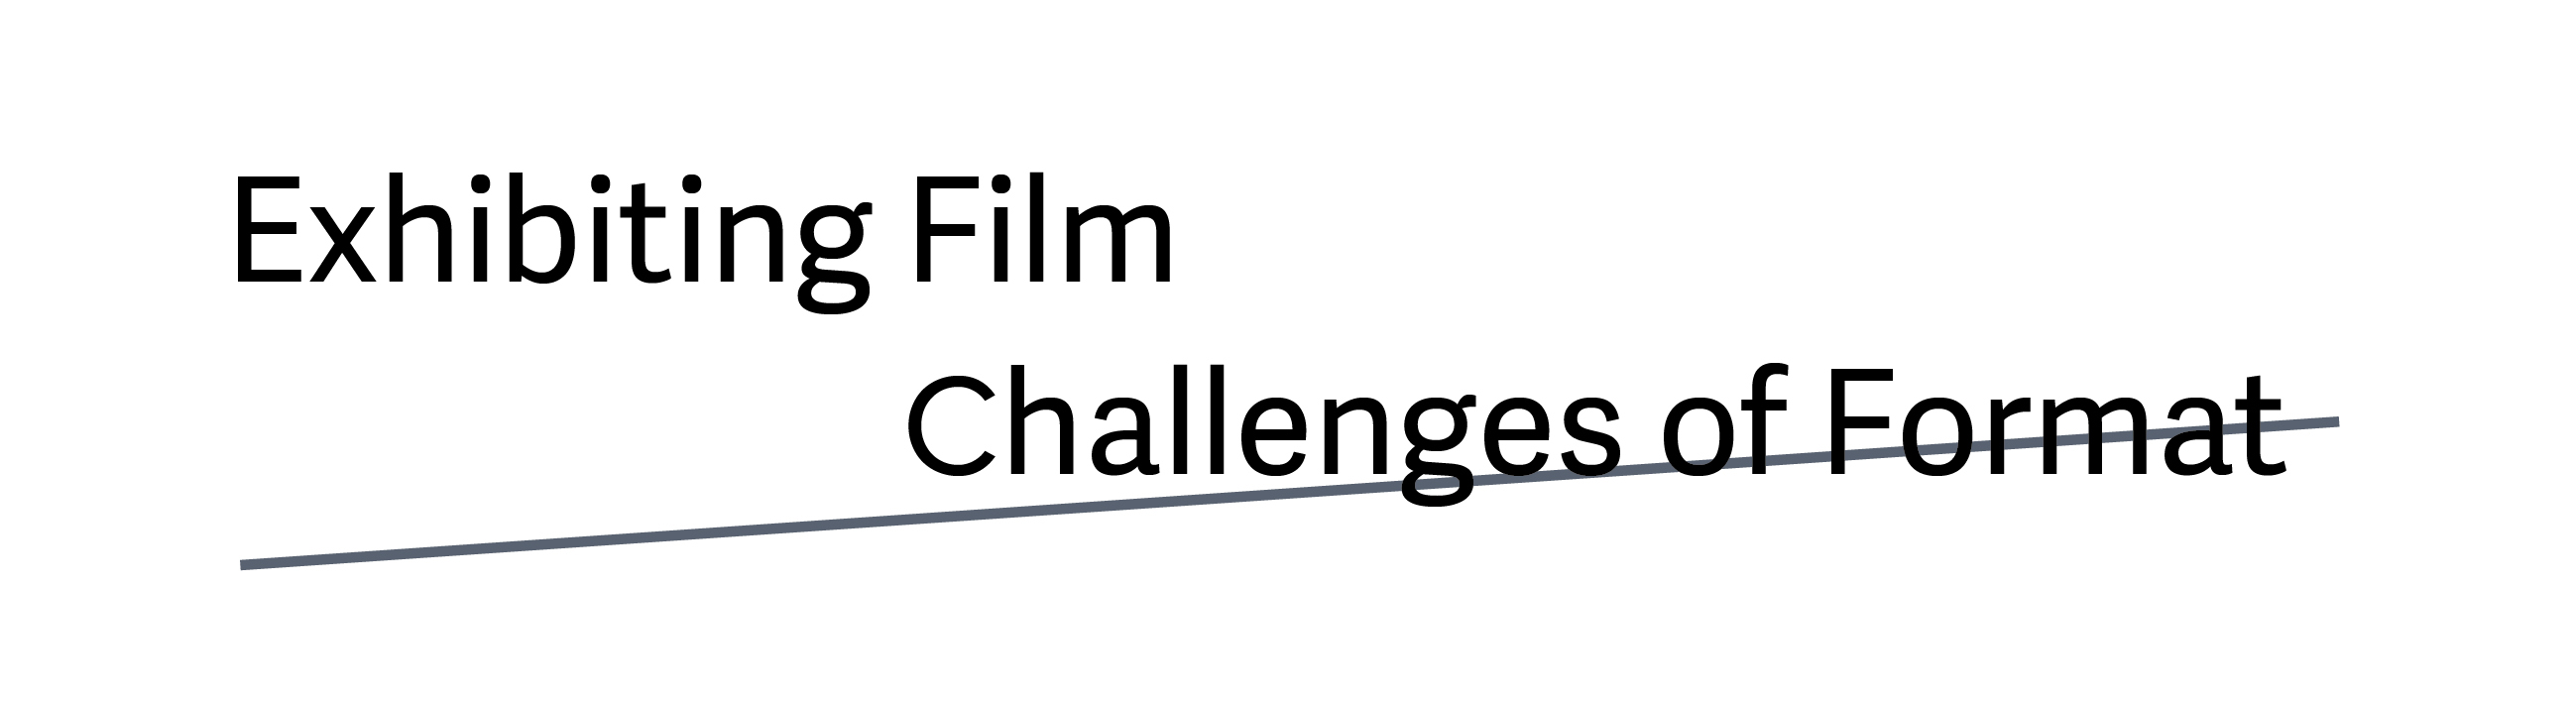 Exhibiting Film - Challenges of Format